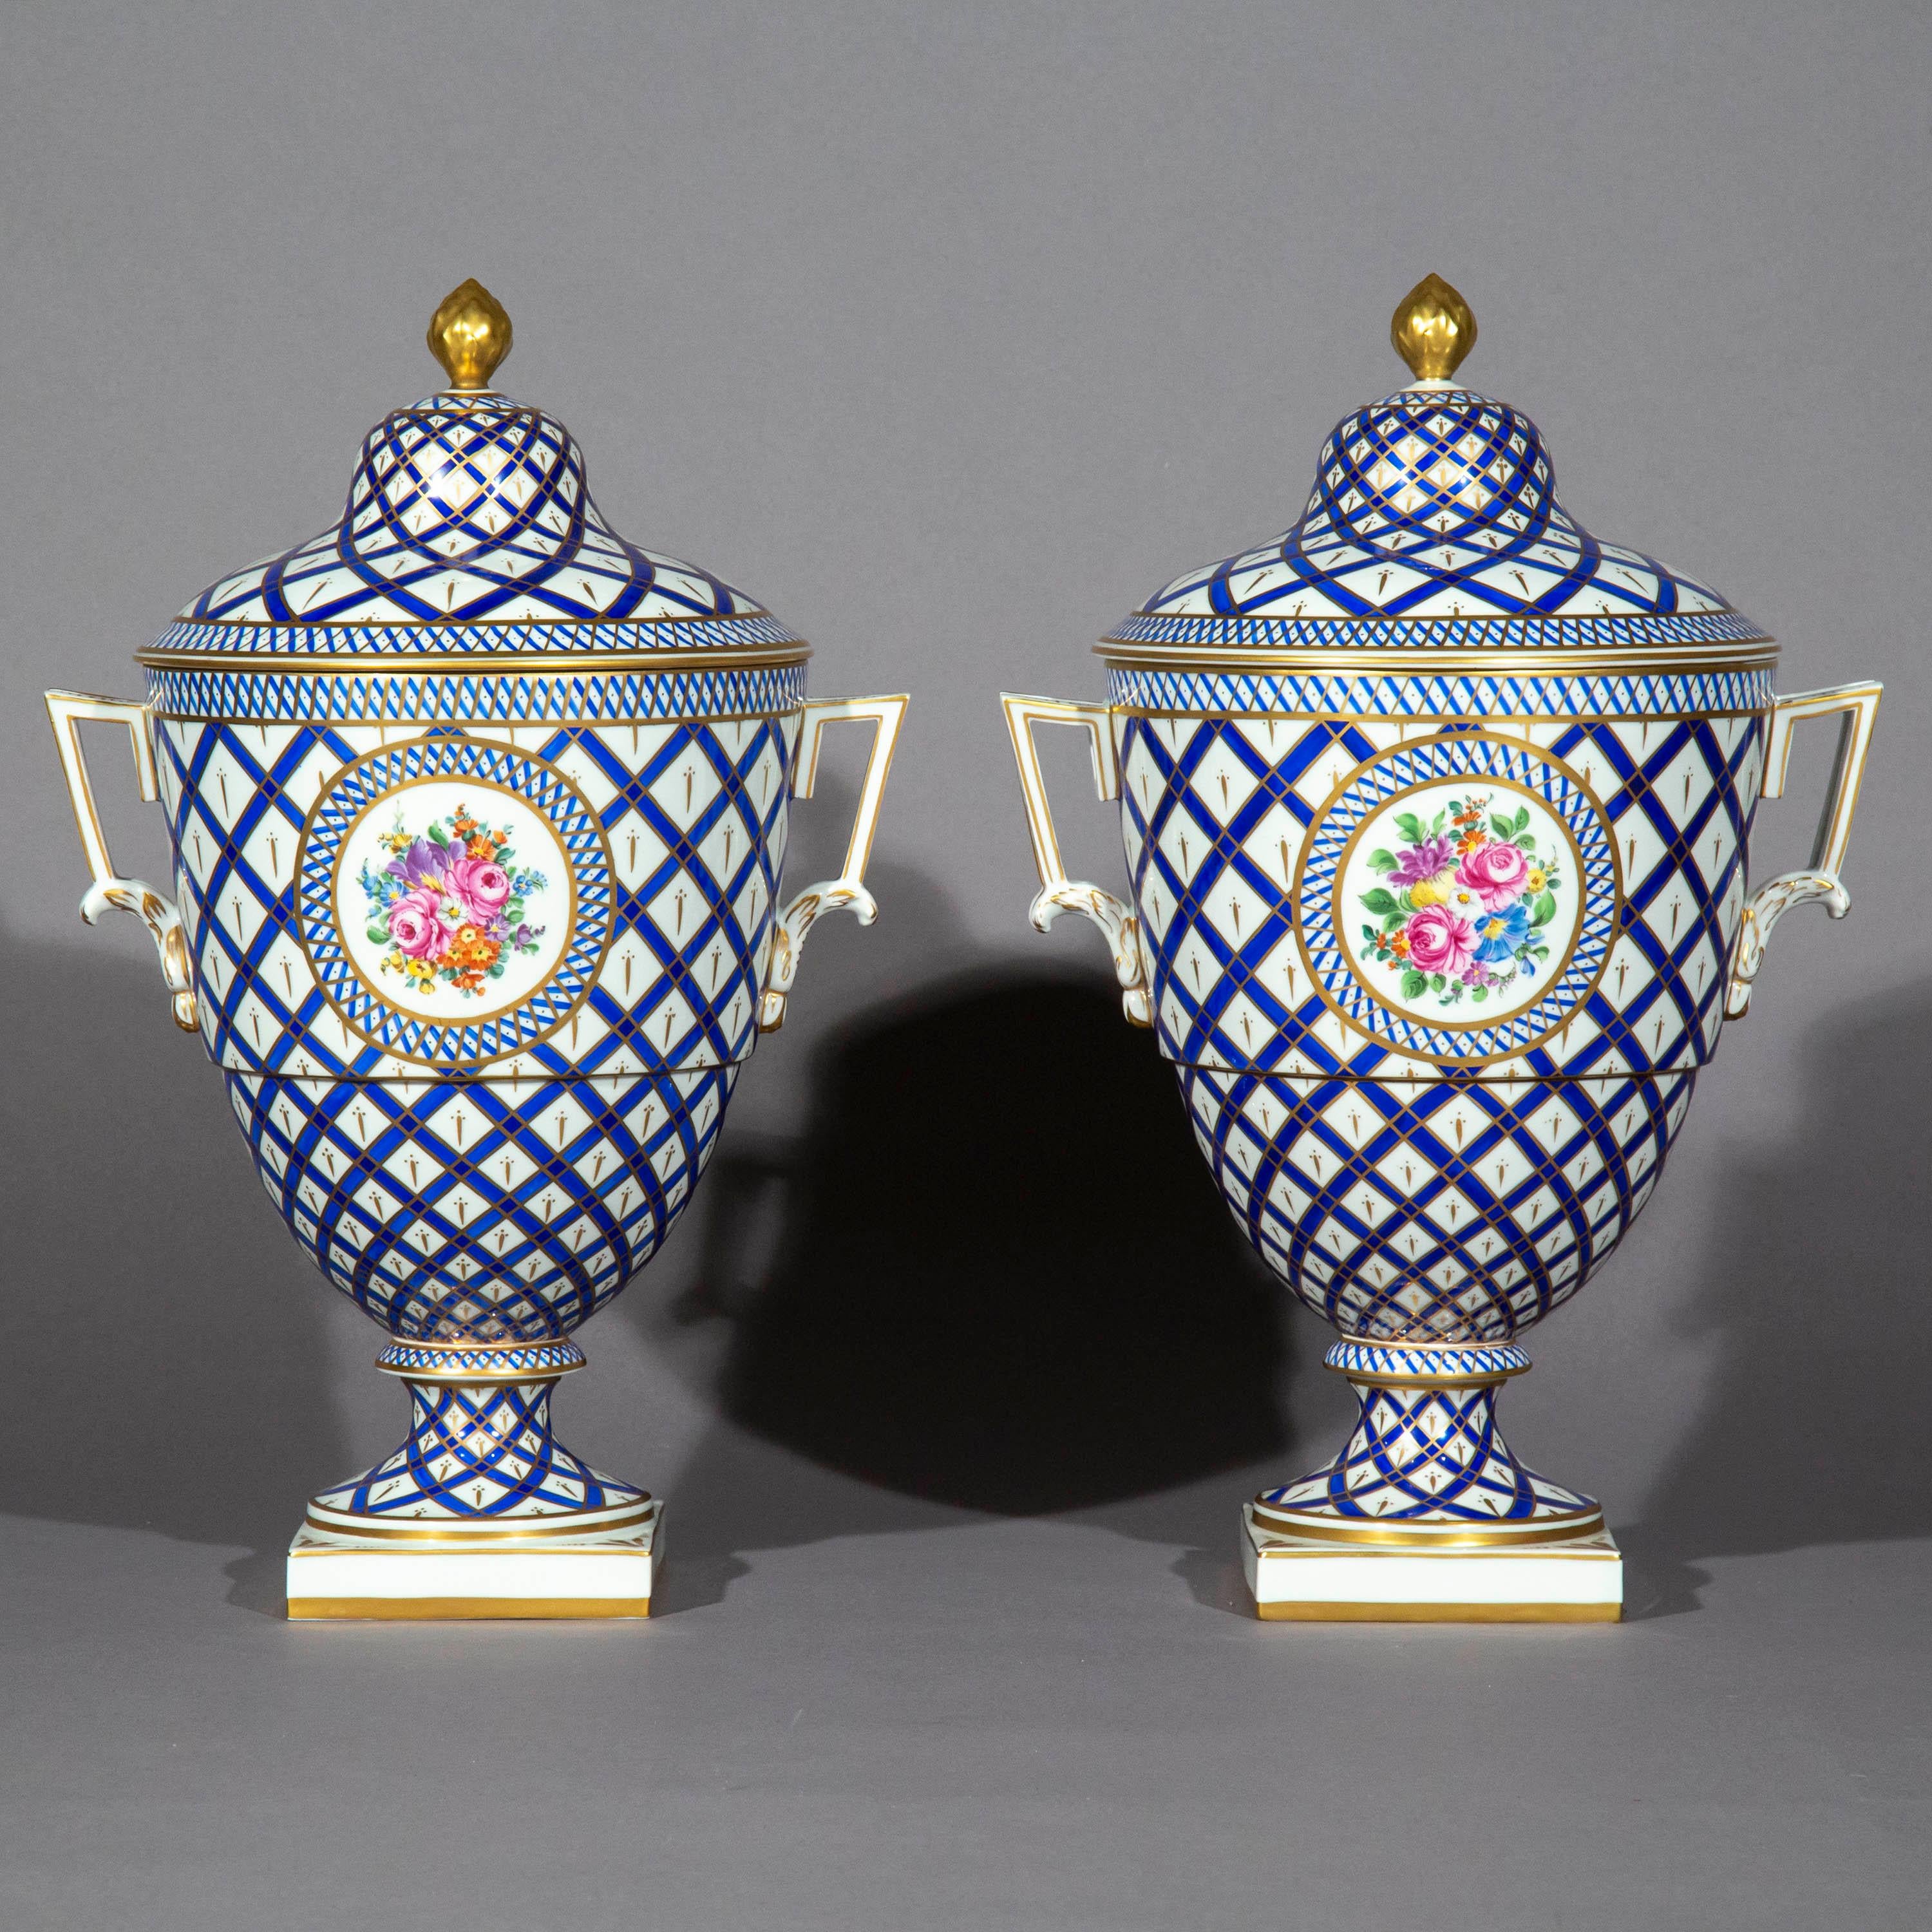 Pair of Hand-Painted Porcelain Vases in the Neoclassical Style For Sale 2